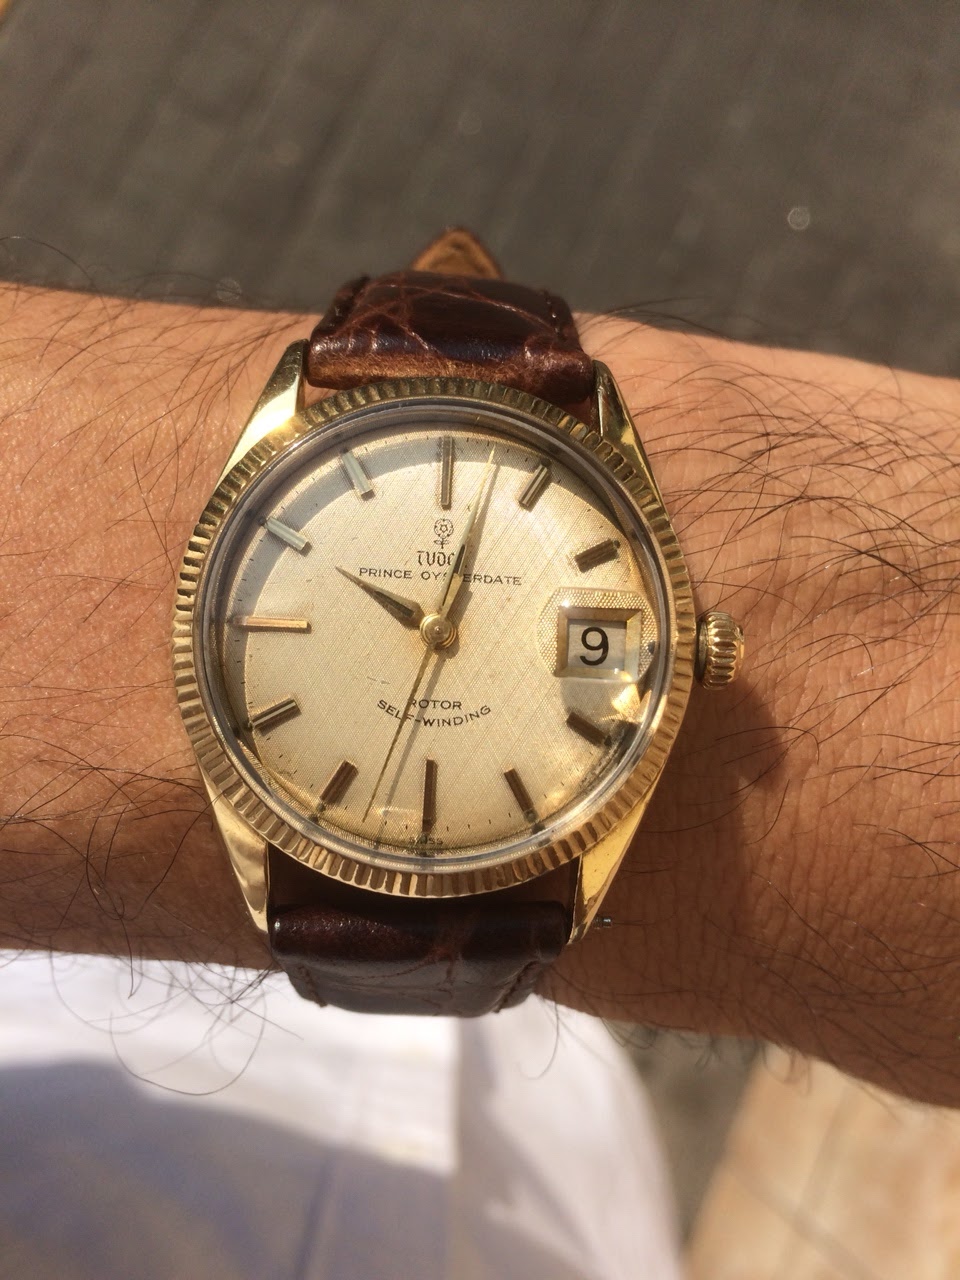 Rolex - The pleasure of wearing a vintage gold watch